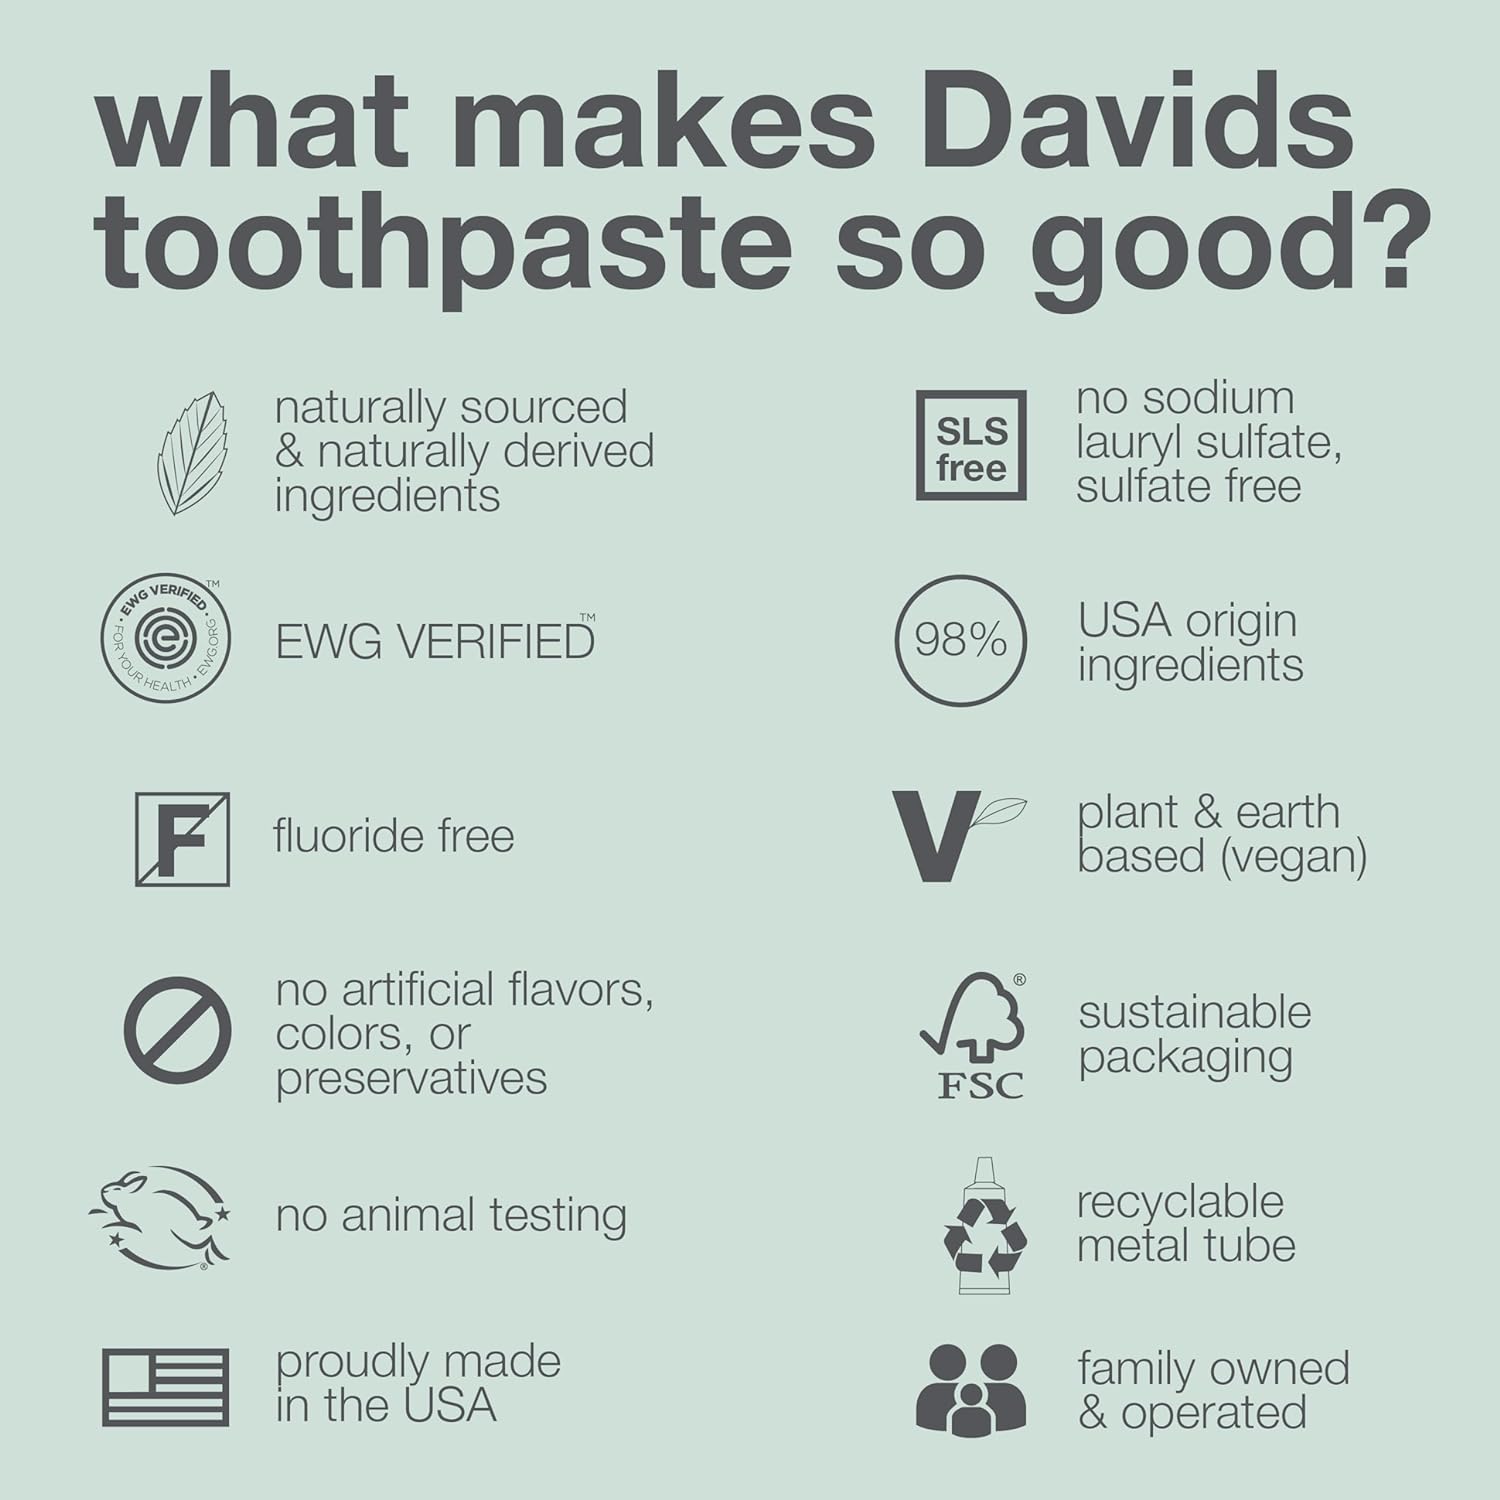 Davids Natural Charcoal Toothpaste for Enhanced Teeth Whitening, Peppermint, Antiplaque, Flouride Free, SLS Free, Enamel Safe, Toothpaste Squeezer Included, Recyclable Metal Tube, 5.25oz : Health & Household